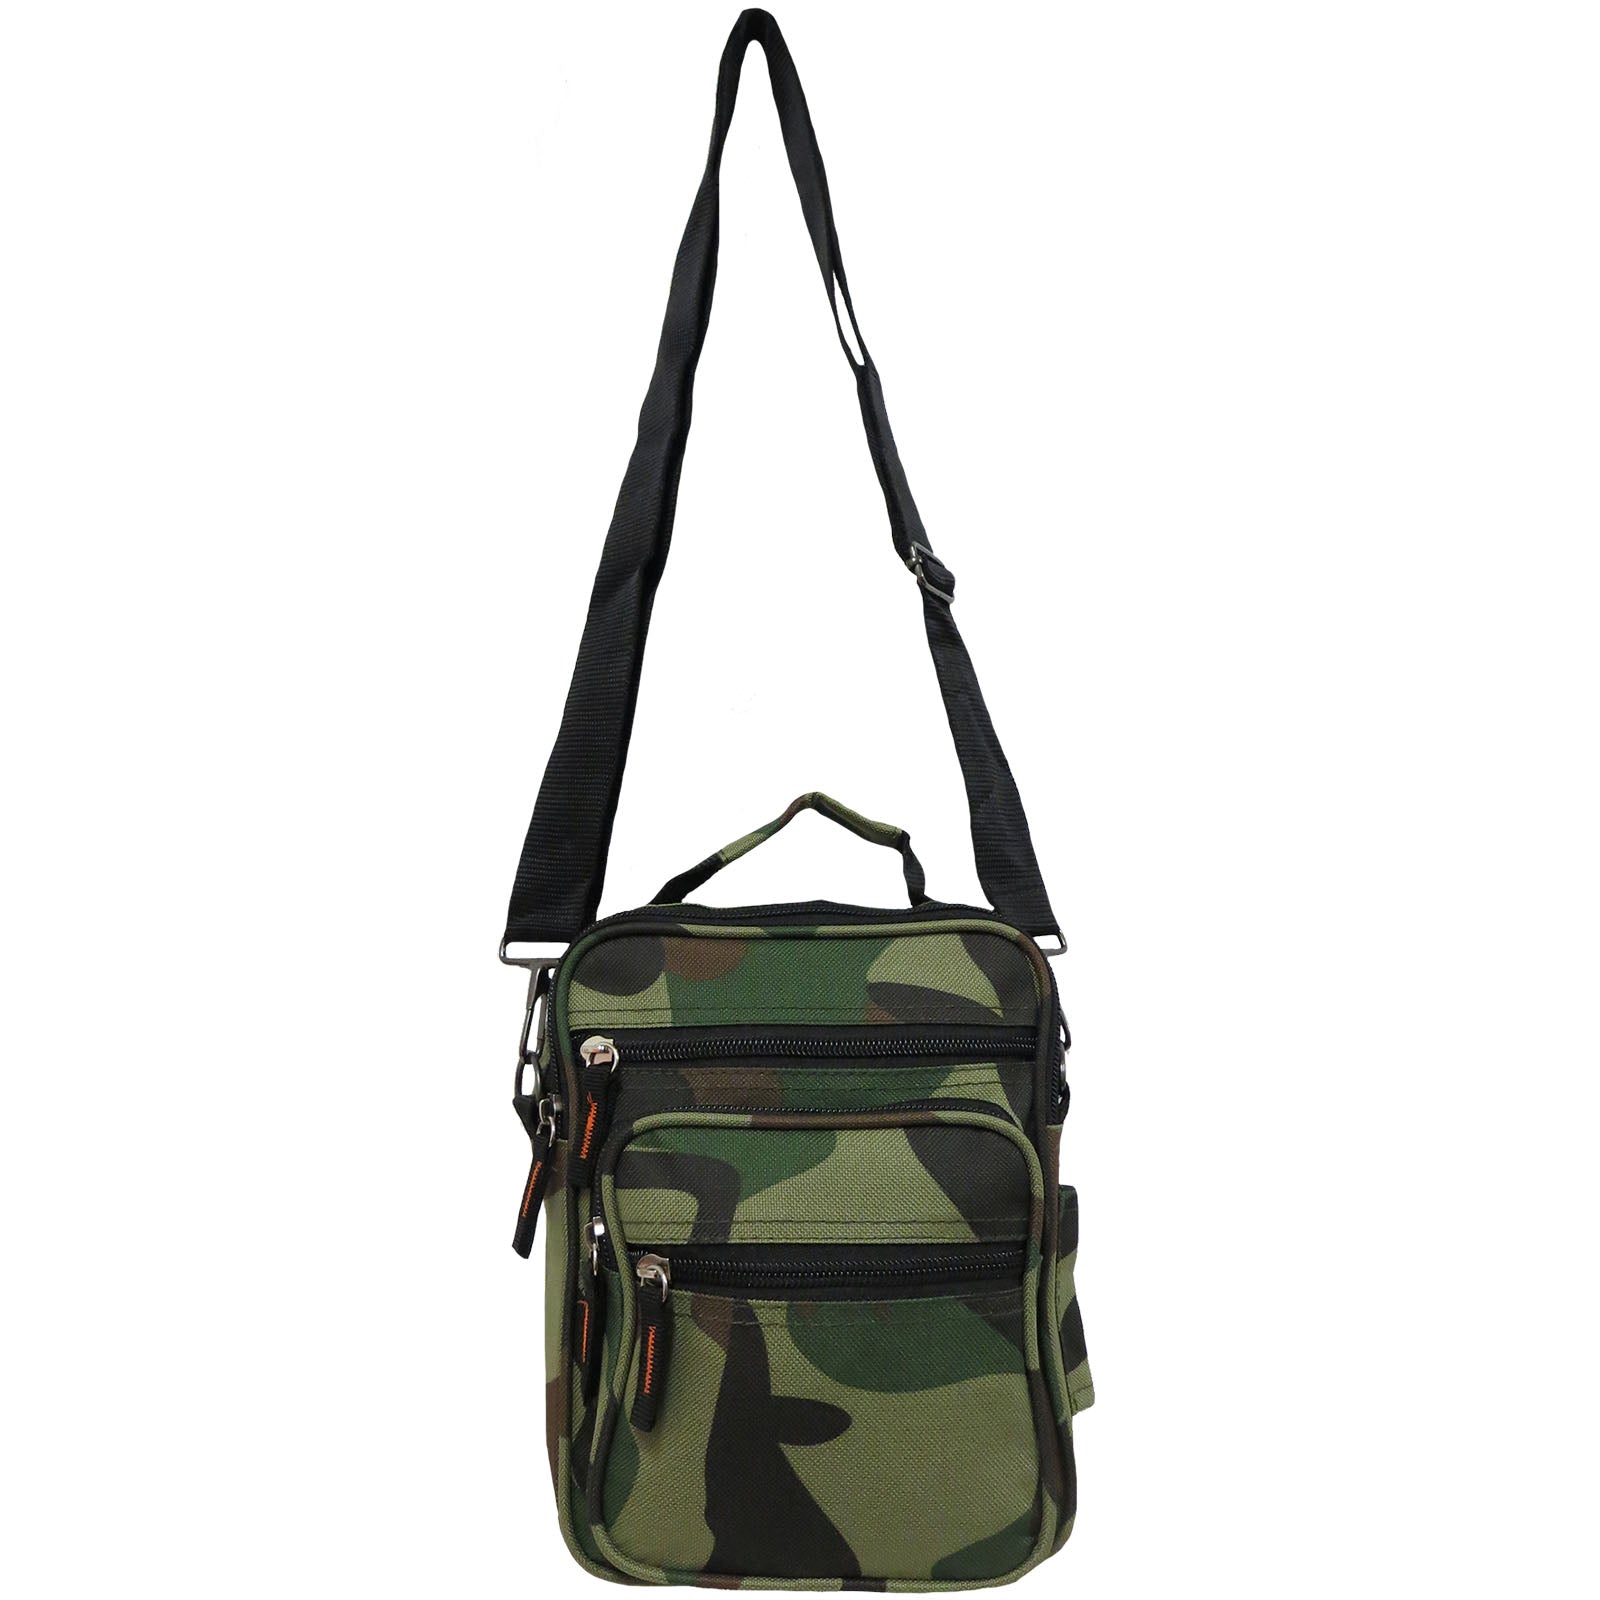 Convertible Wholesale Messenger Bag Fanny pack in Camouflage - Alessa Jamie